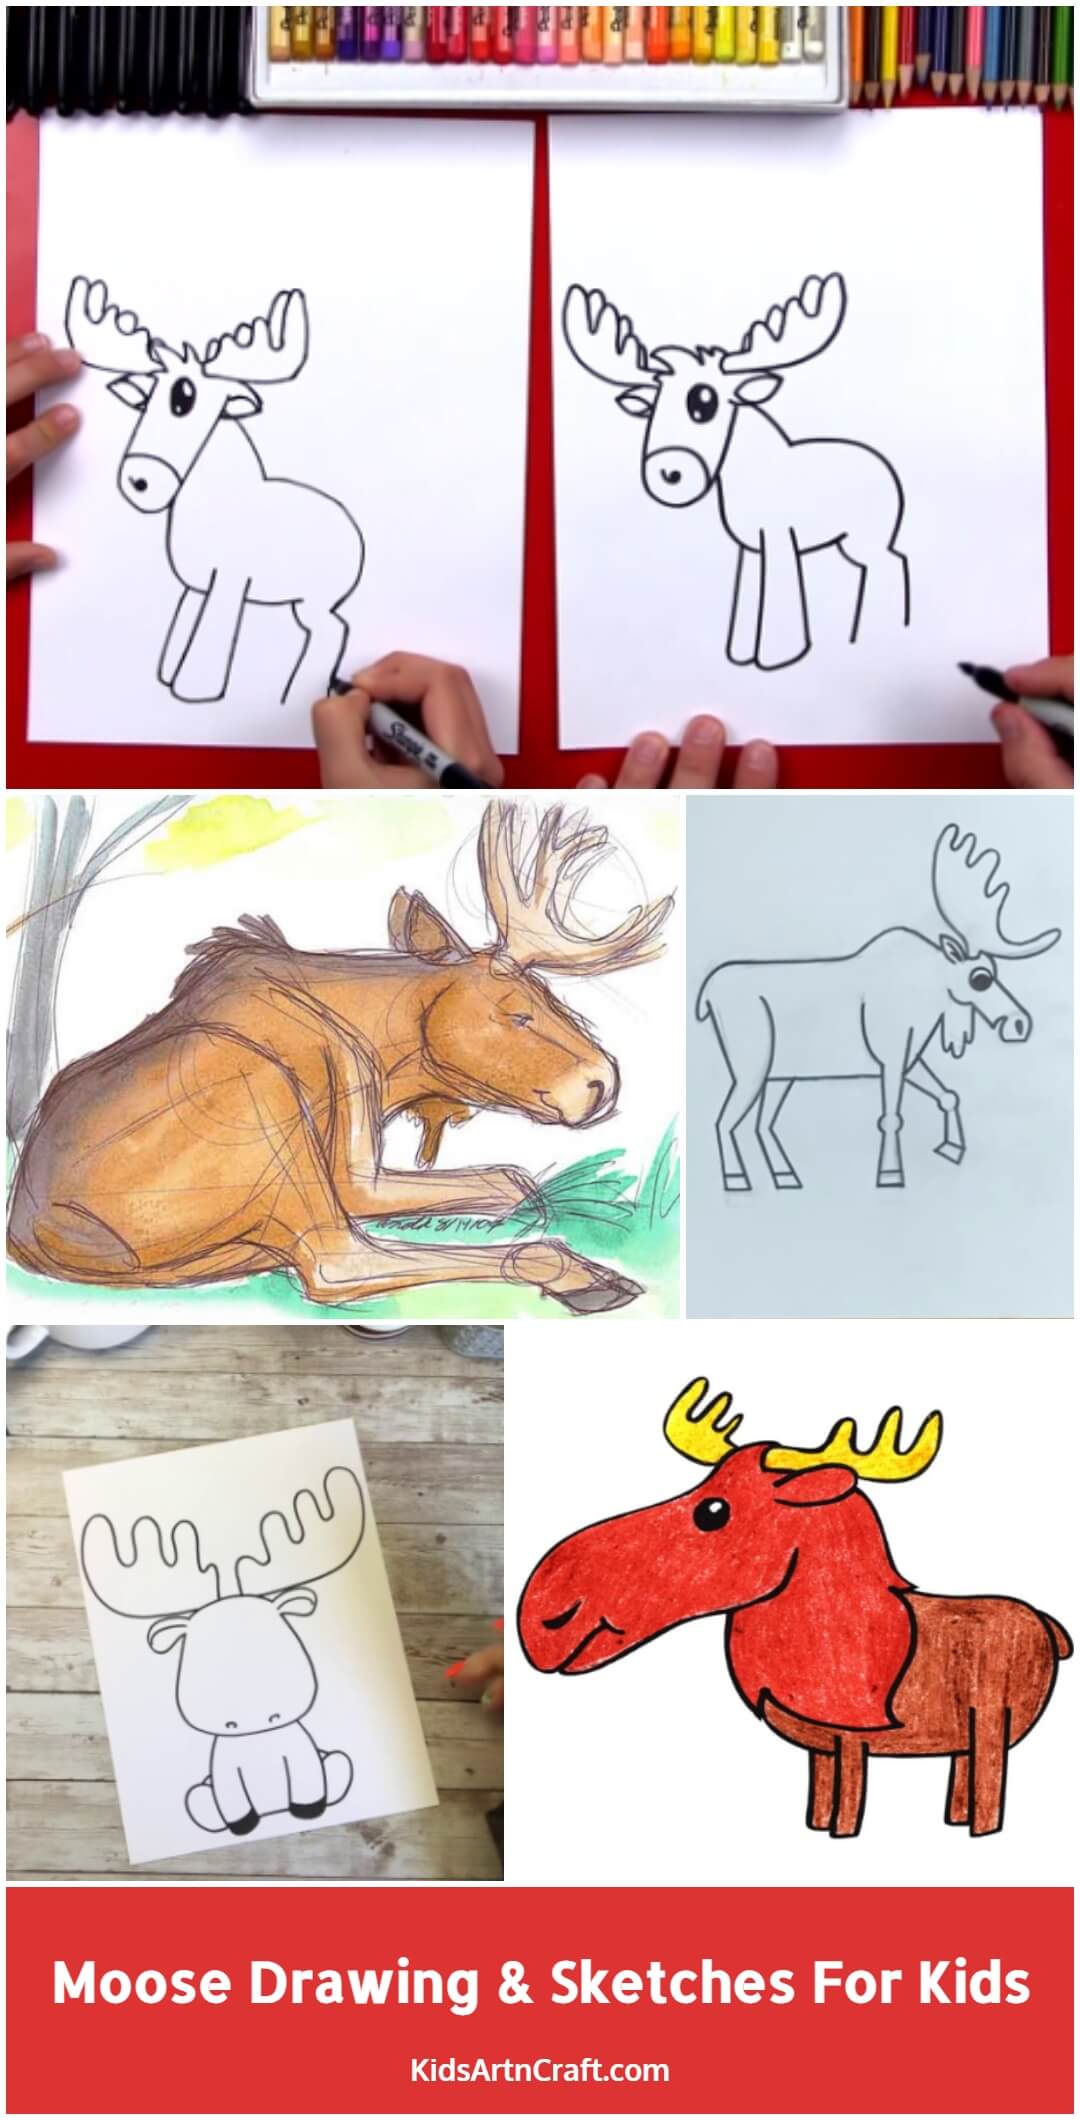 Moose Drawing & Sketches For Kids